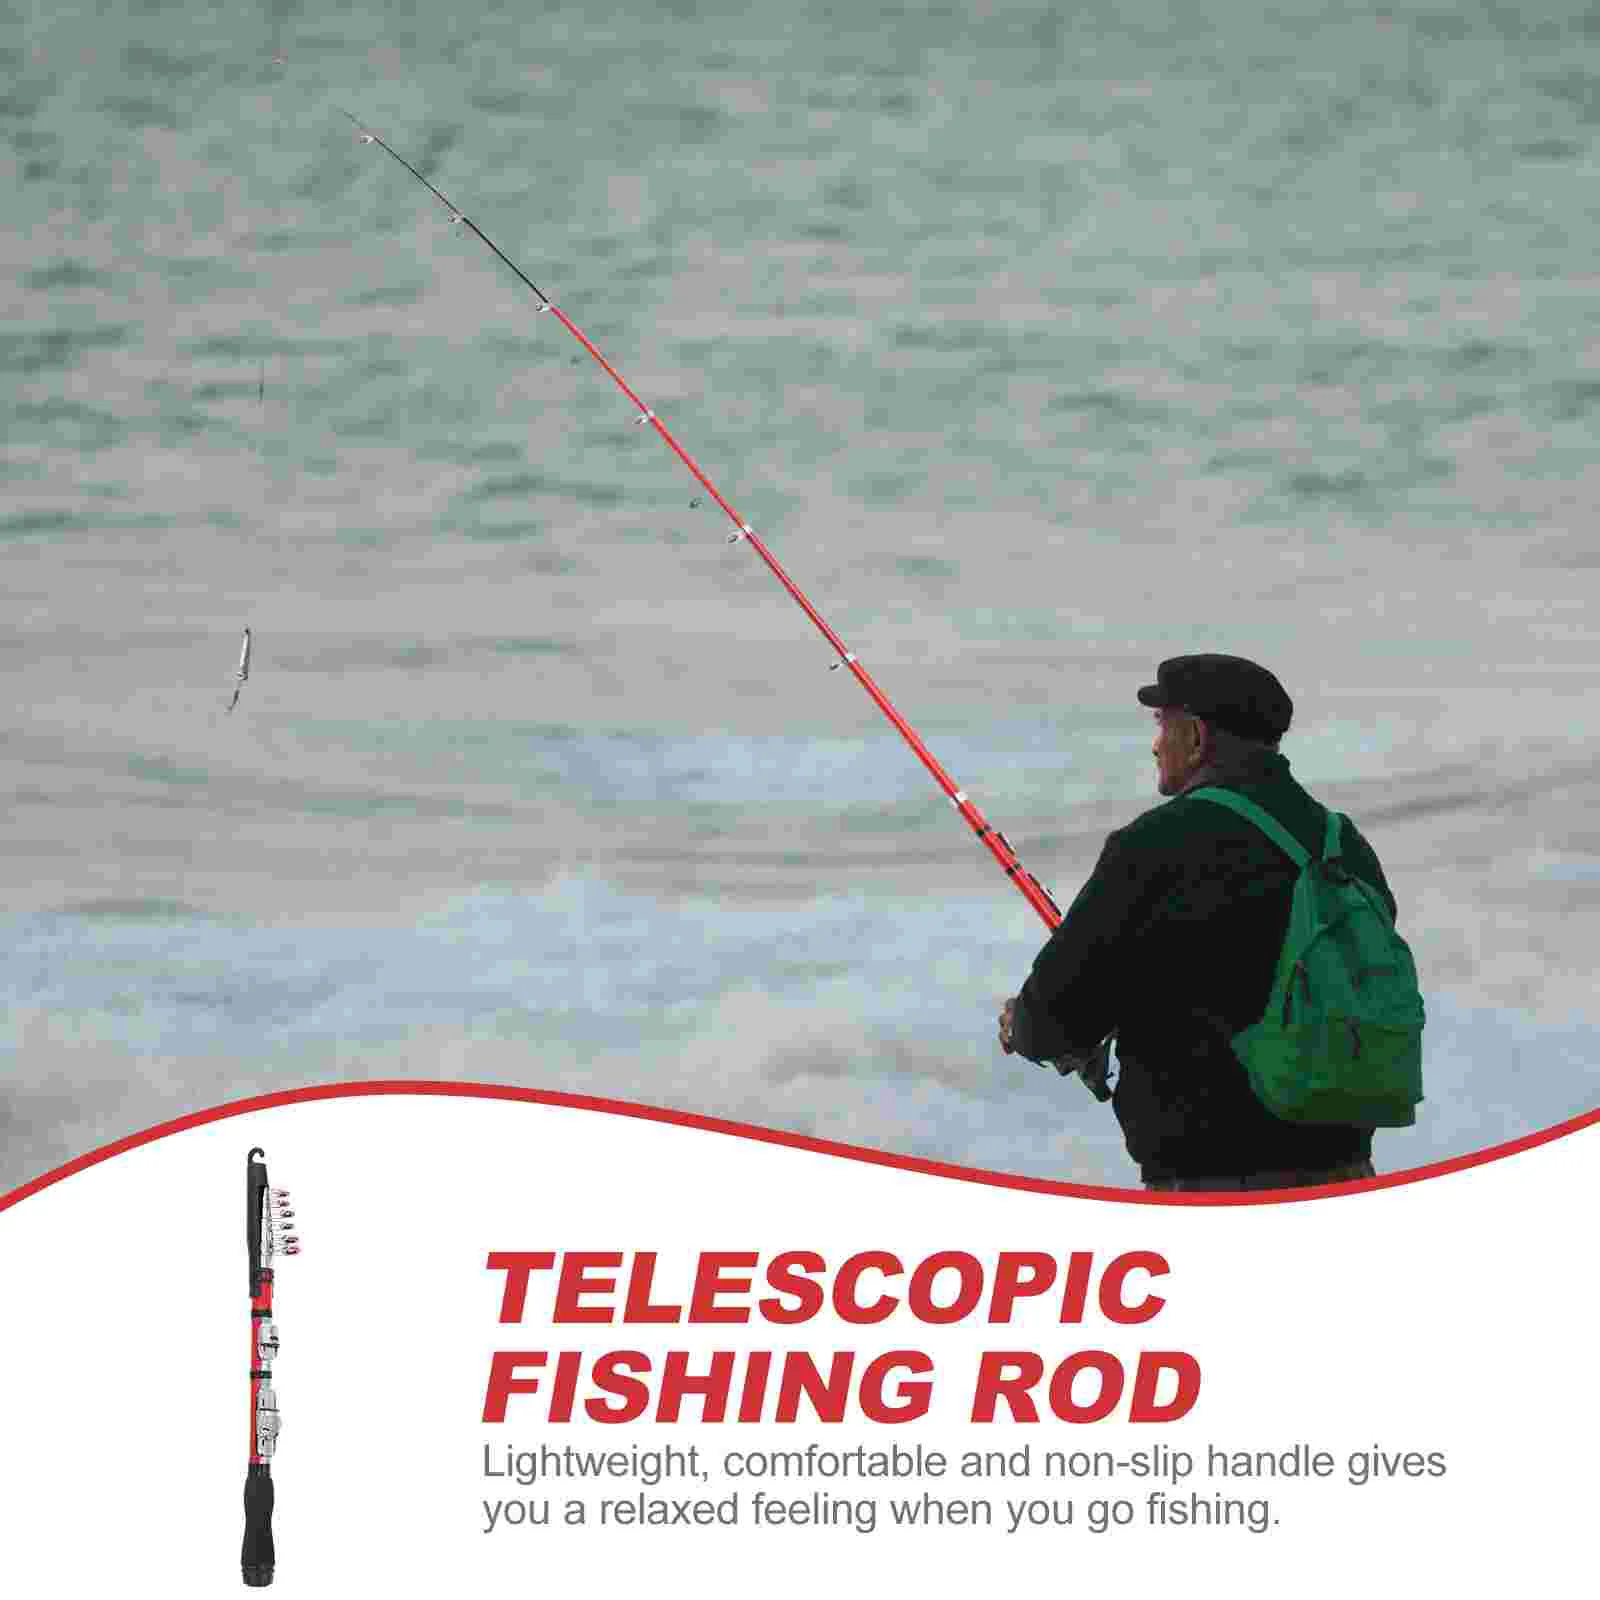 Telescopic Fishing Rod Small Telescopic Tackle Outdoor Pole Portable Men  Carbon Supply Lightweight Man Rods